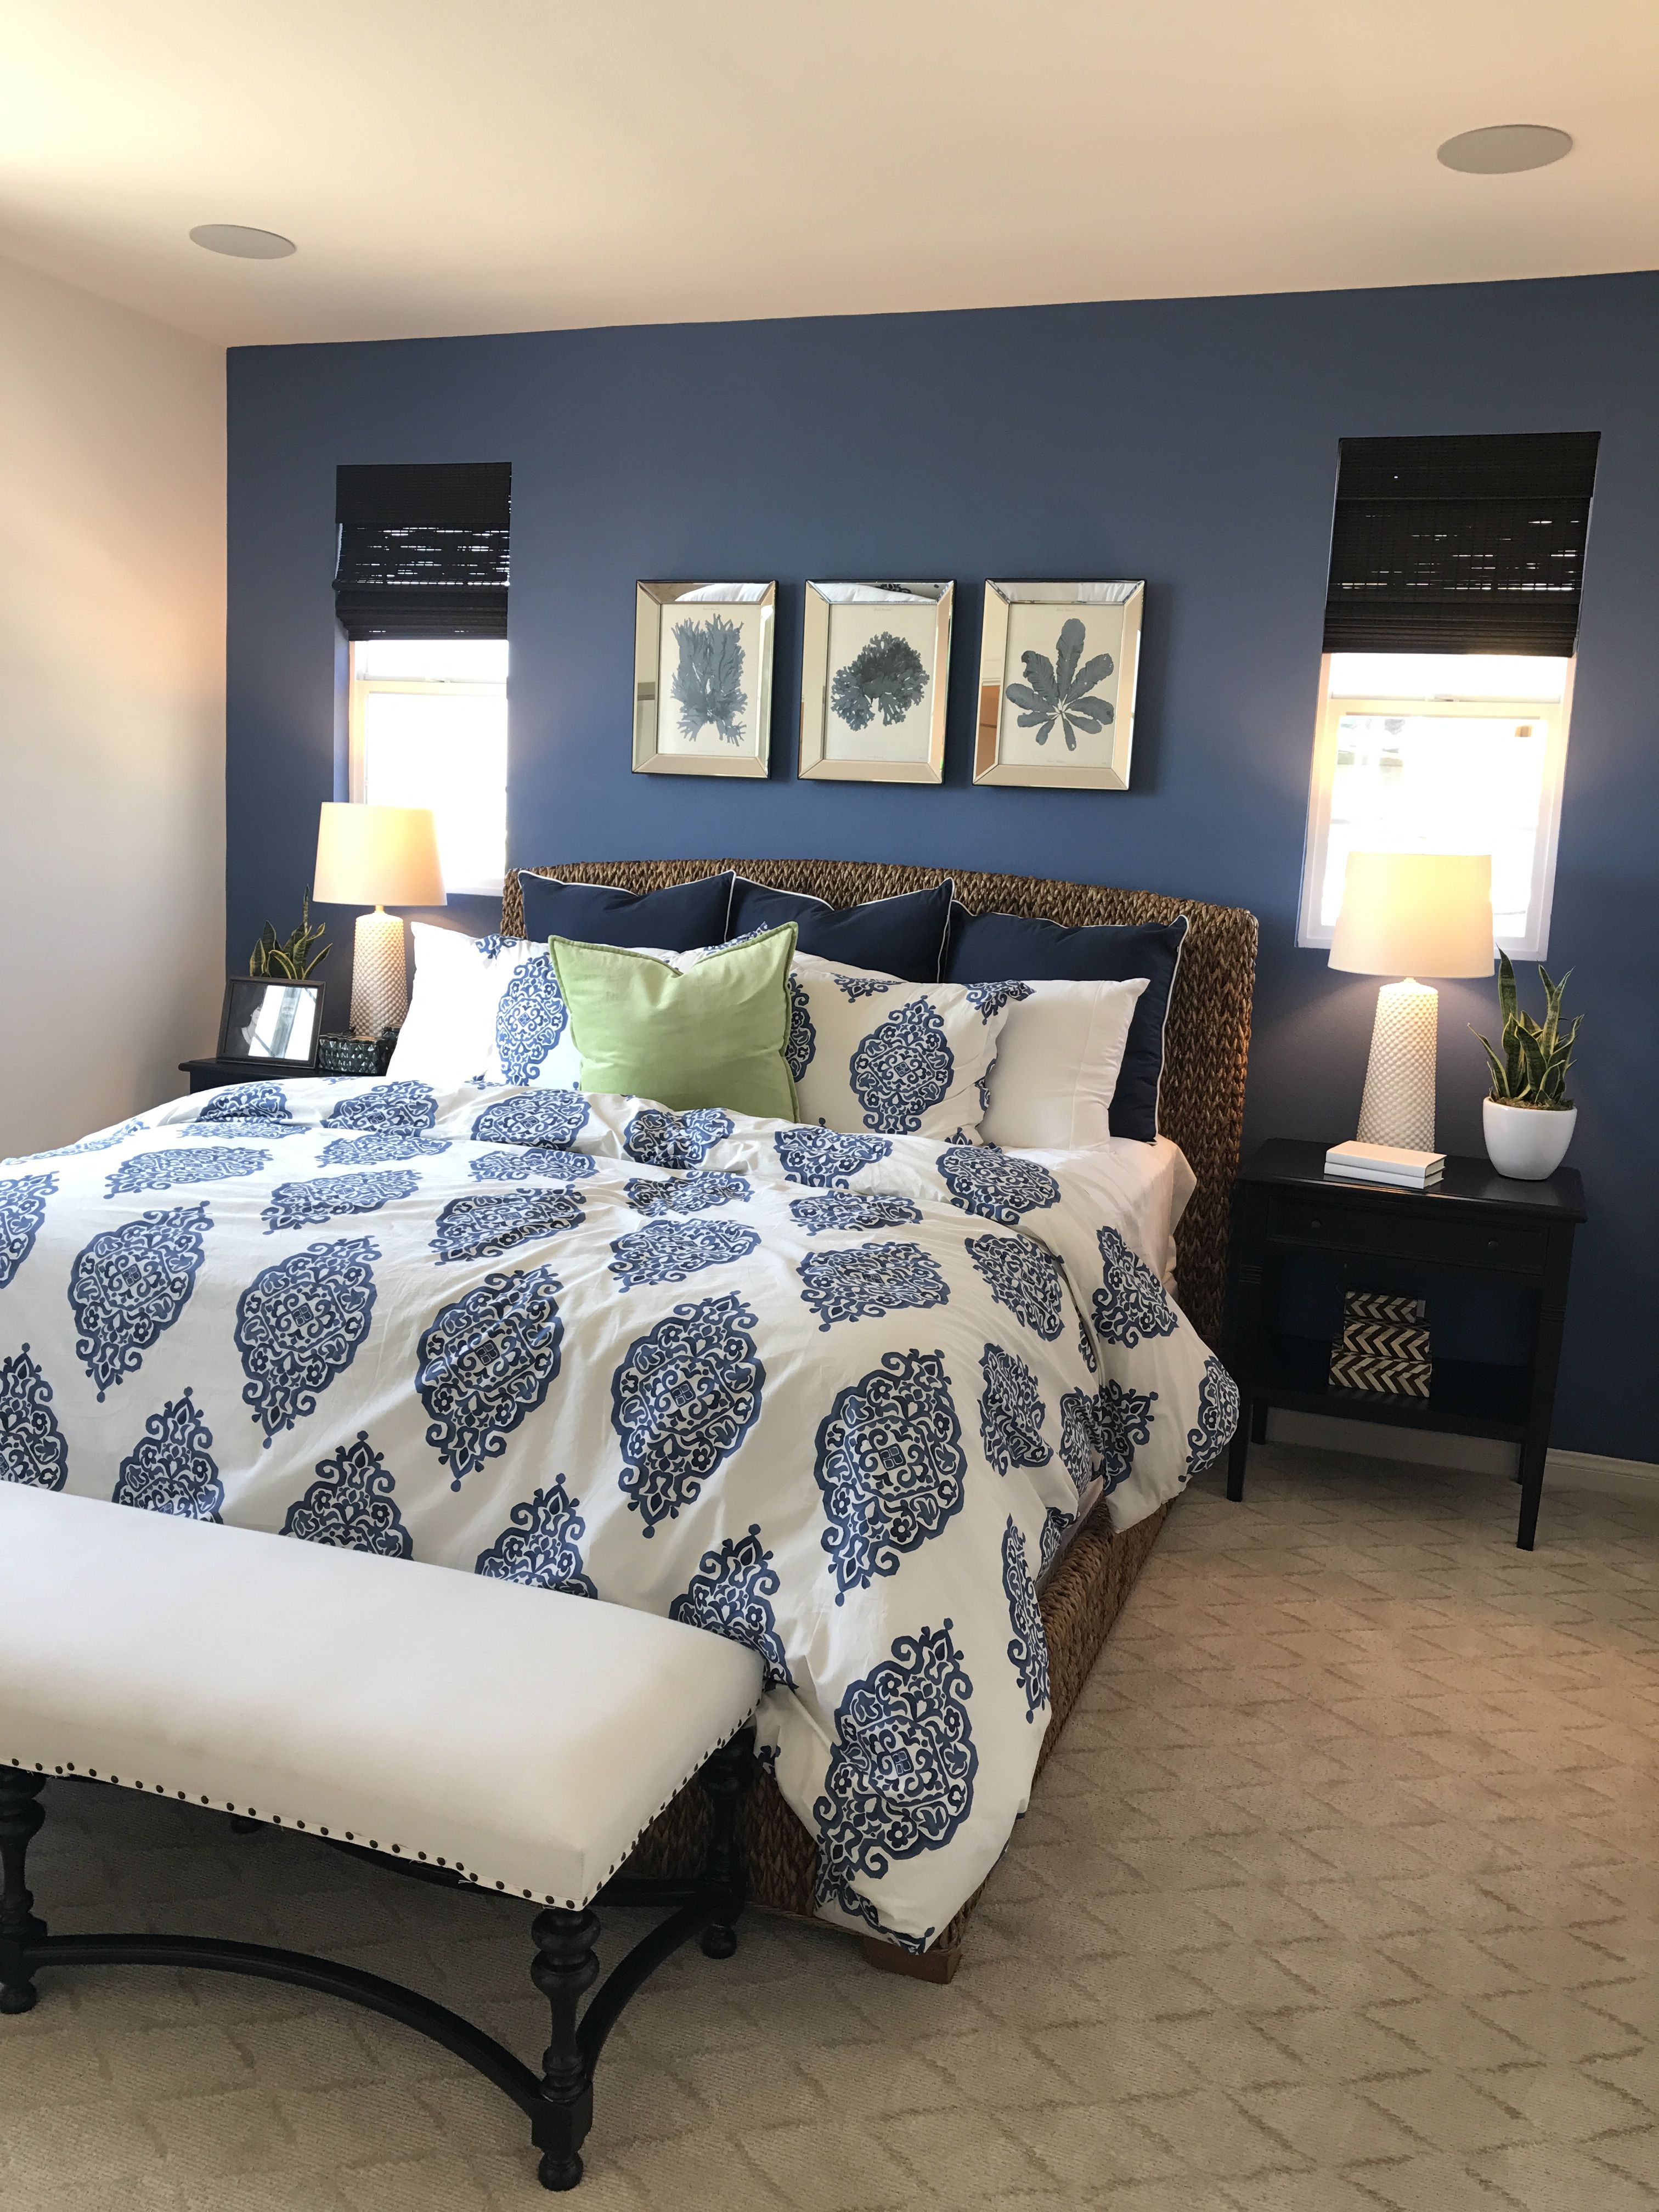 Color Play: Choosing The Perfect Hues For Your Bedroom Accent Wall